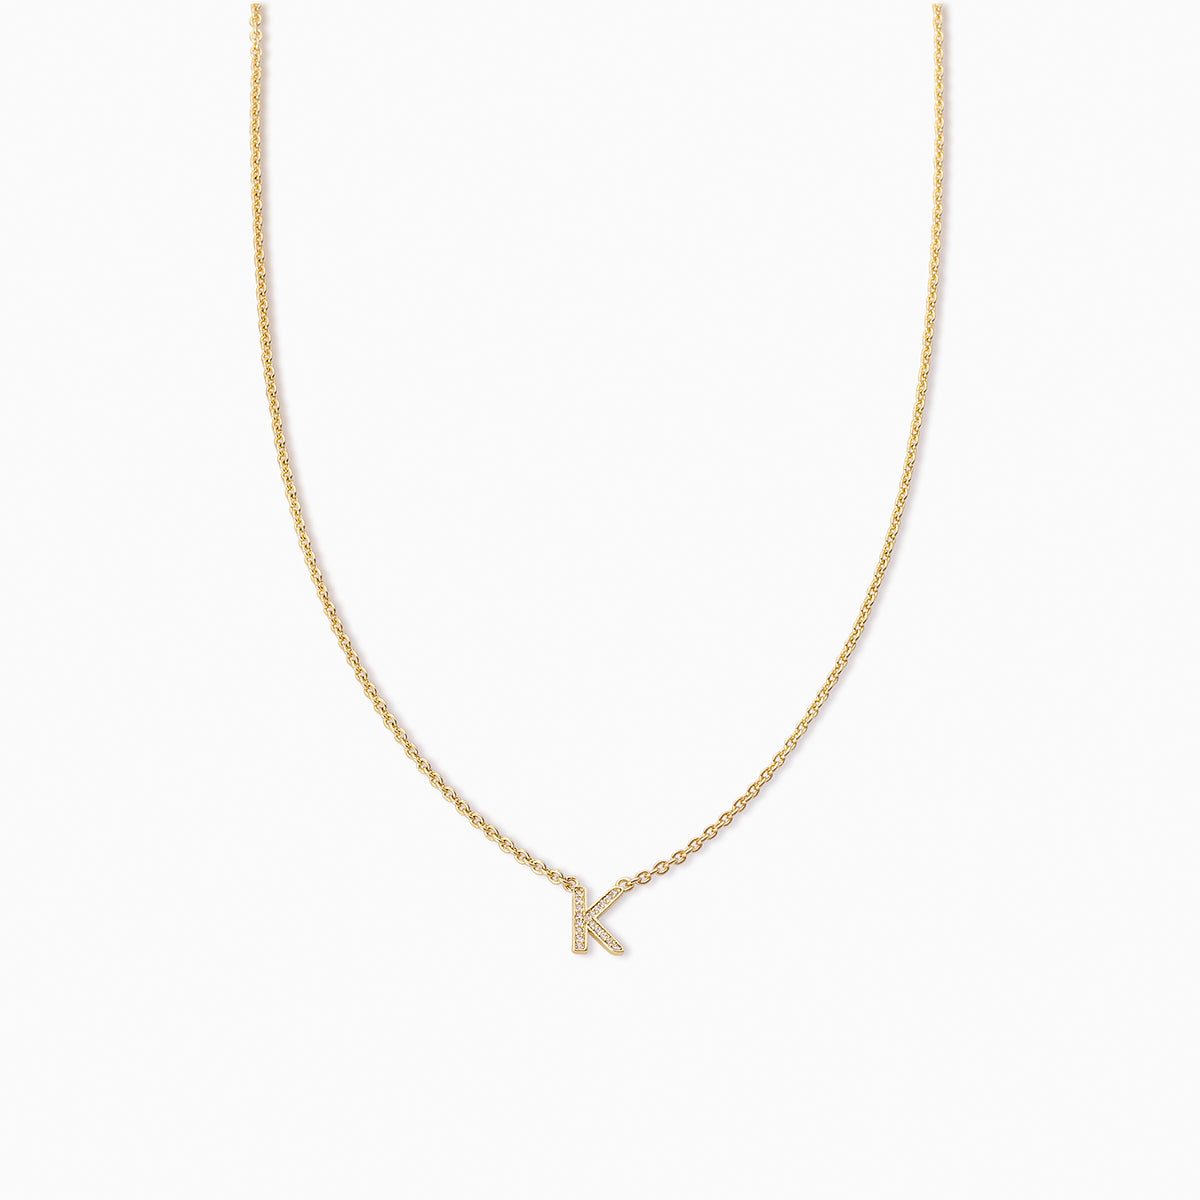 Initial Here Necklace | Gold K | Product Image | Uncommon James